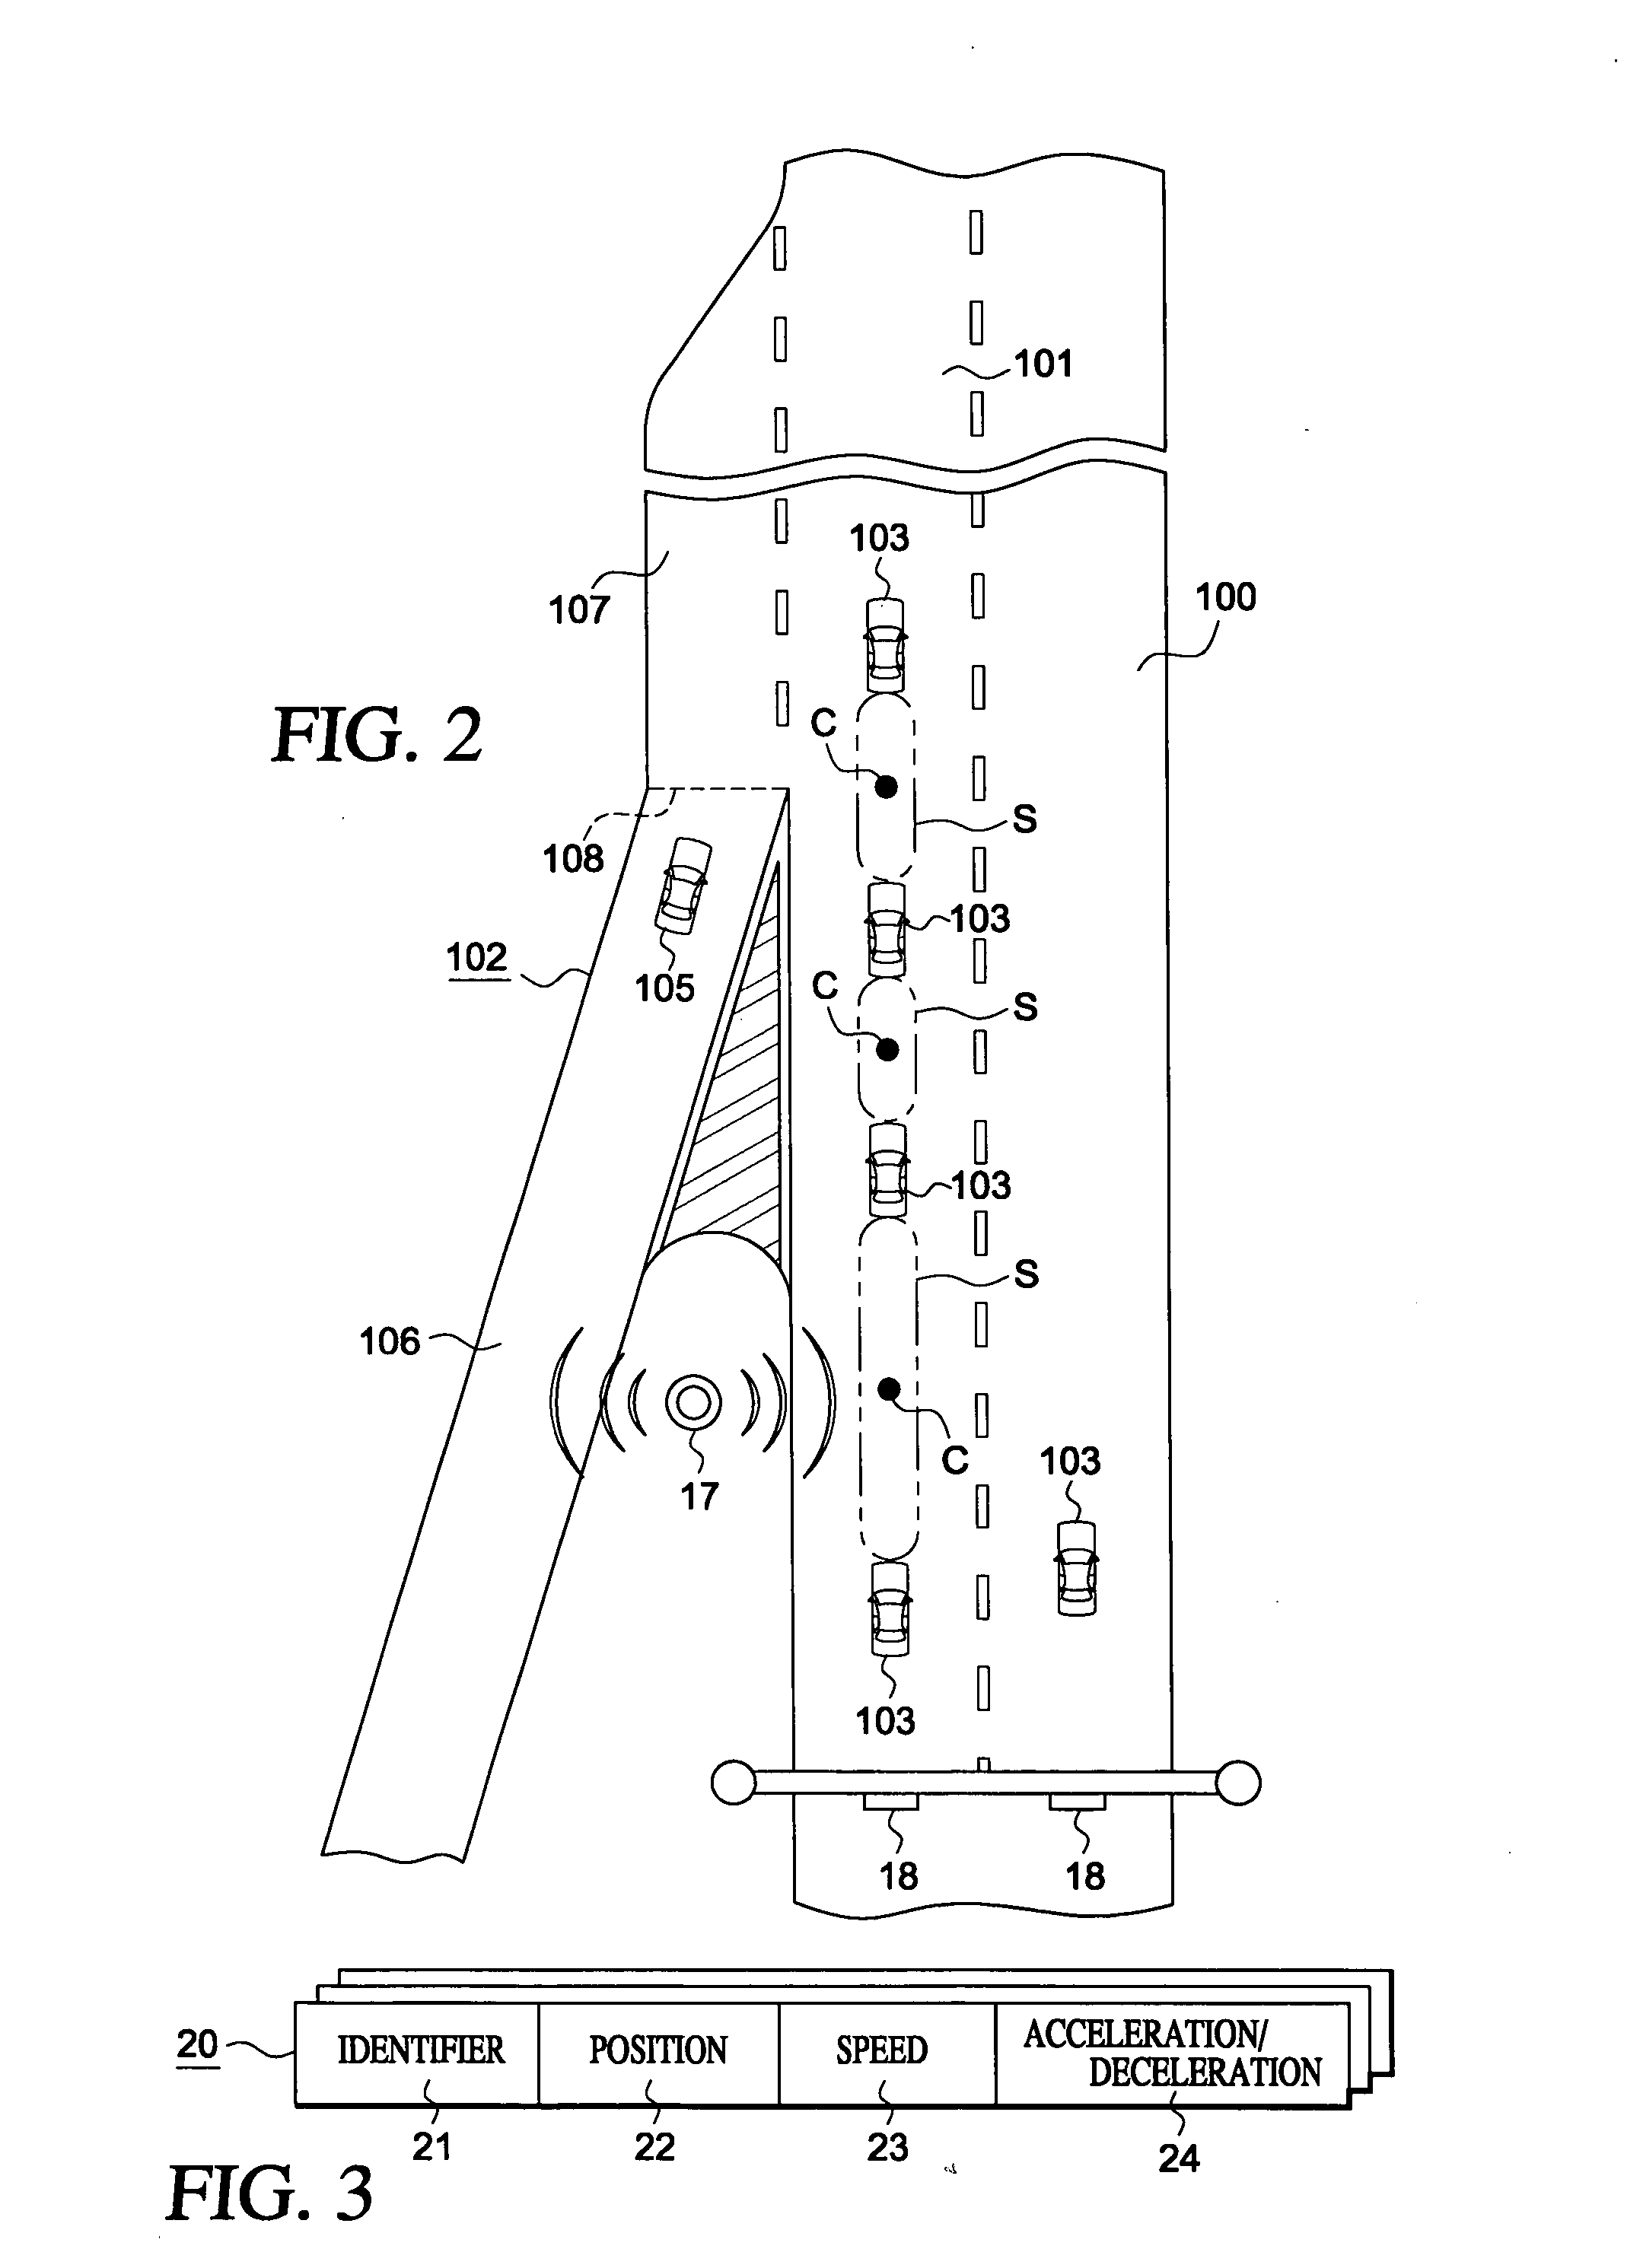 Driving support method and device